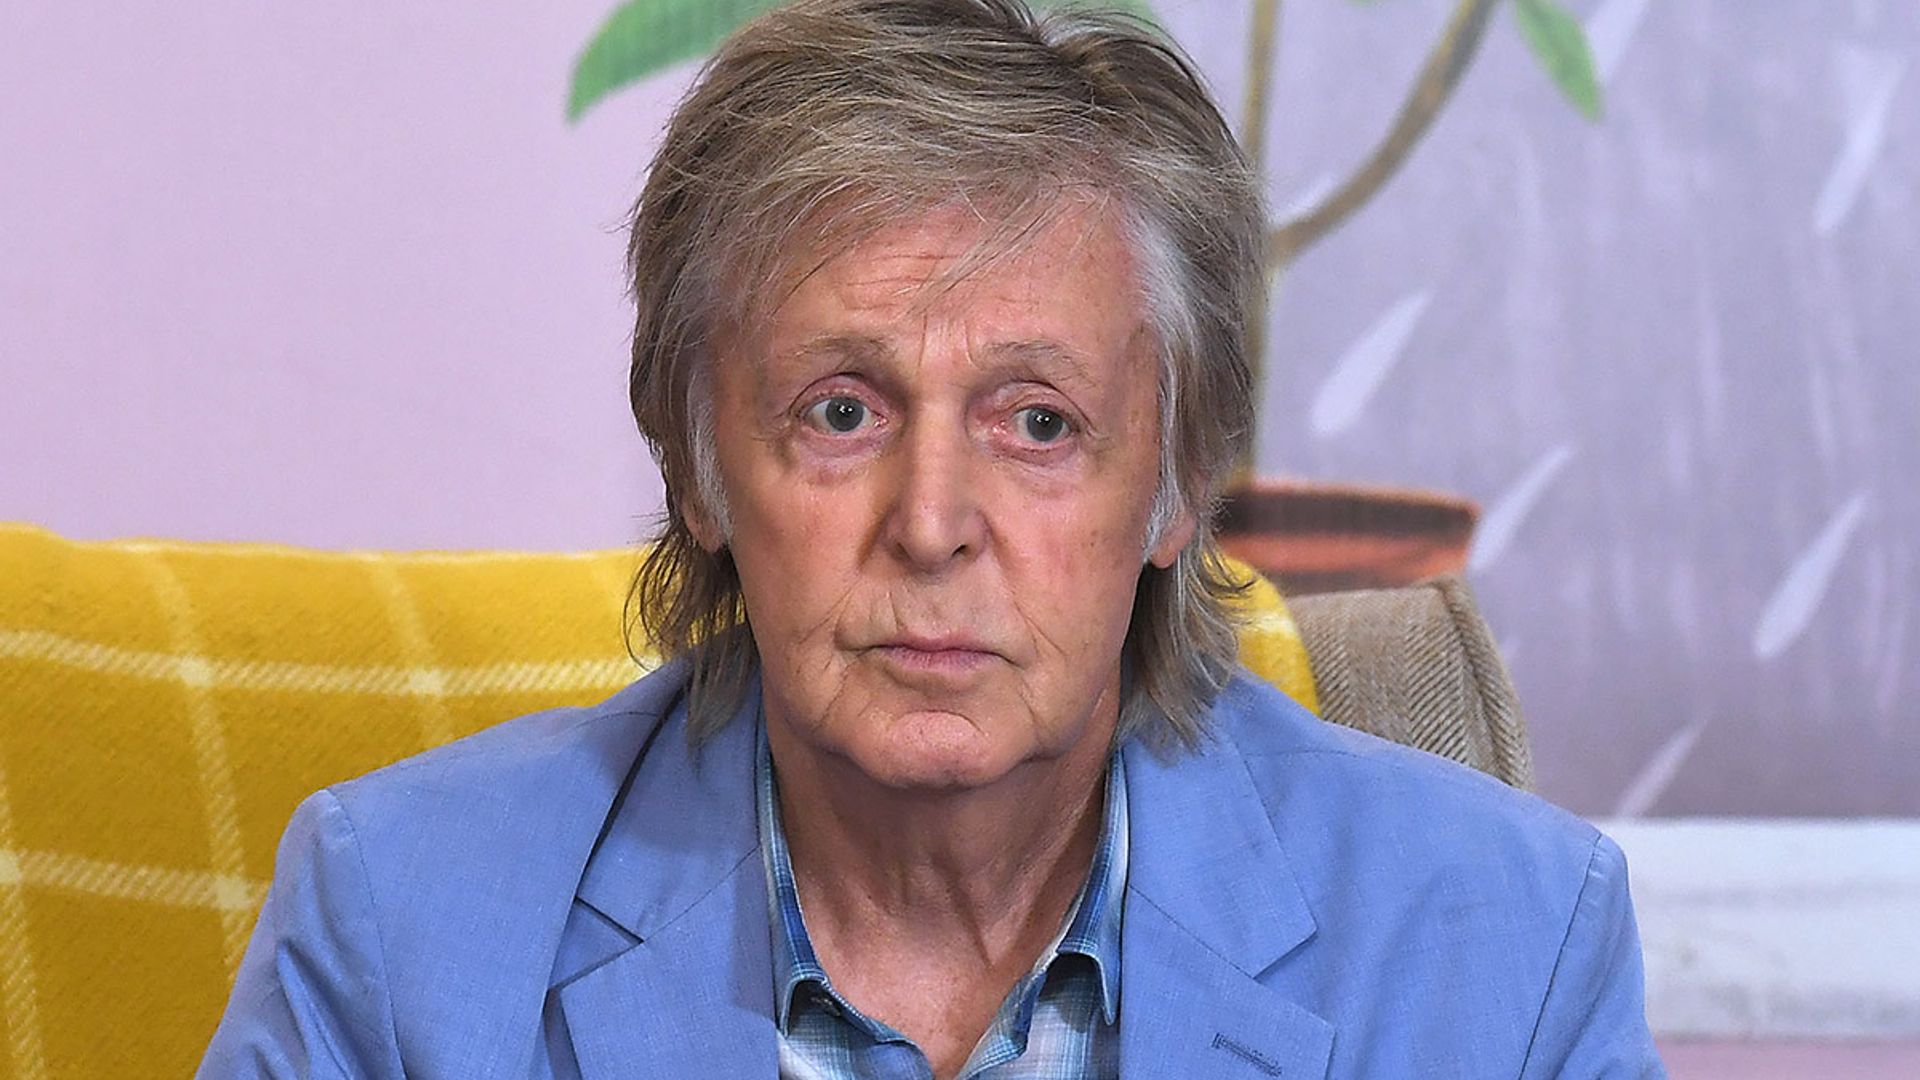 Paul McCartney says he cried for a year when wife Linda died